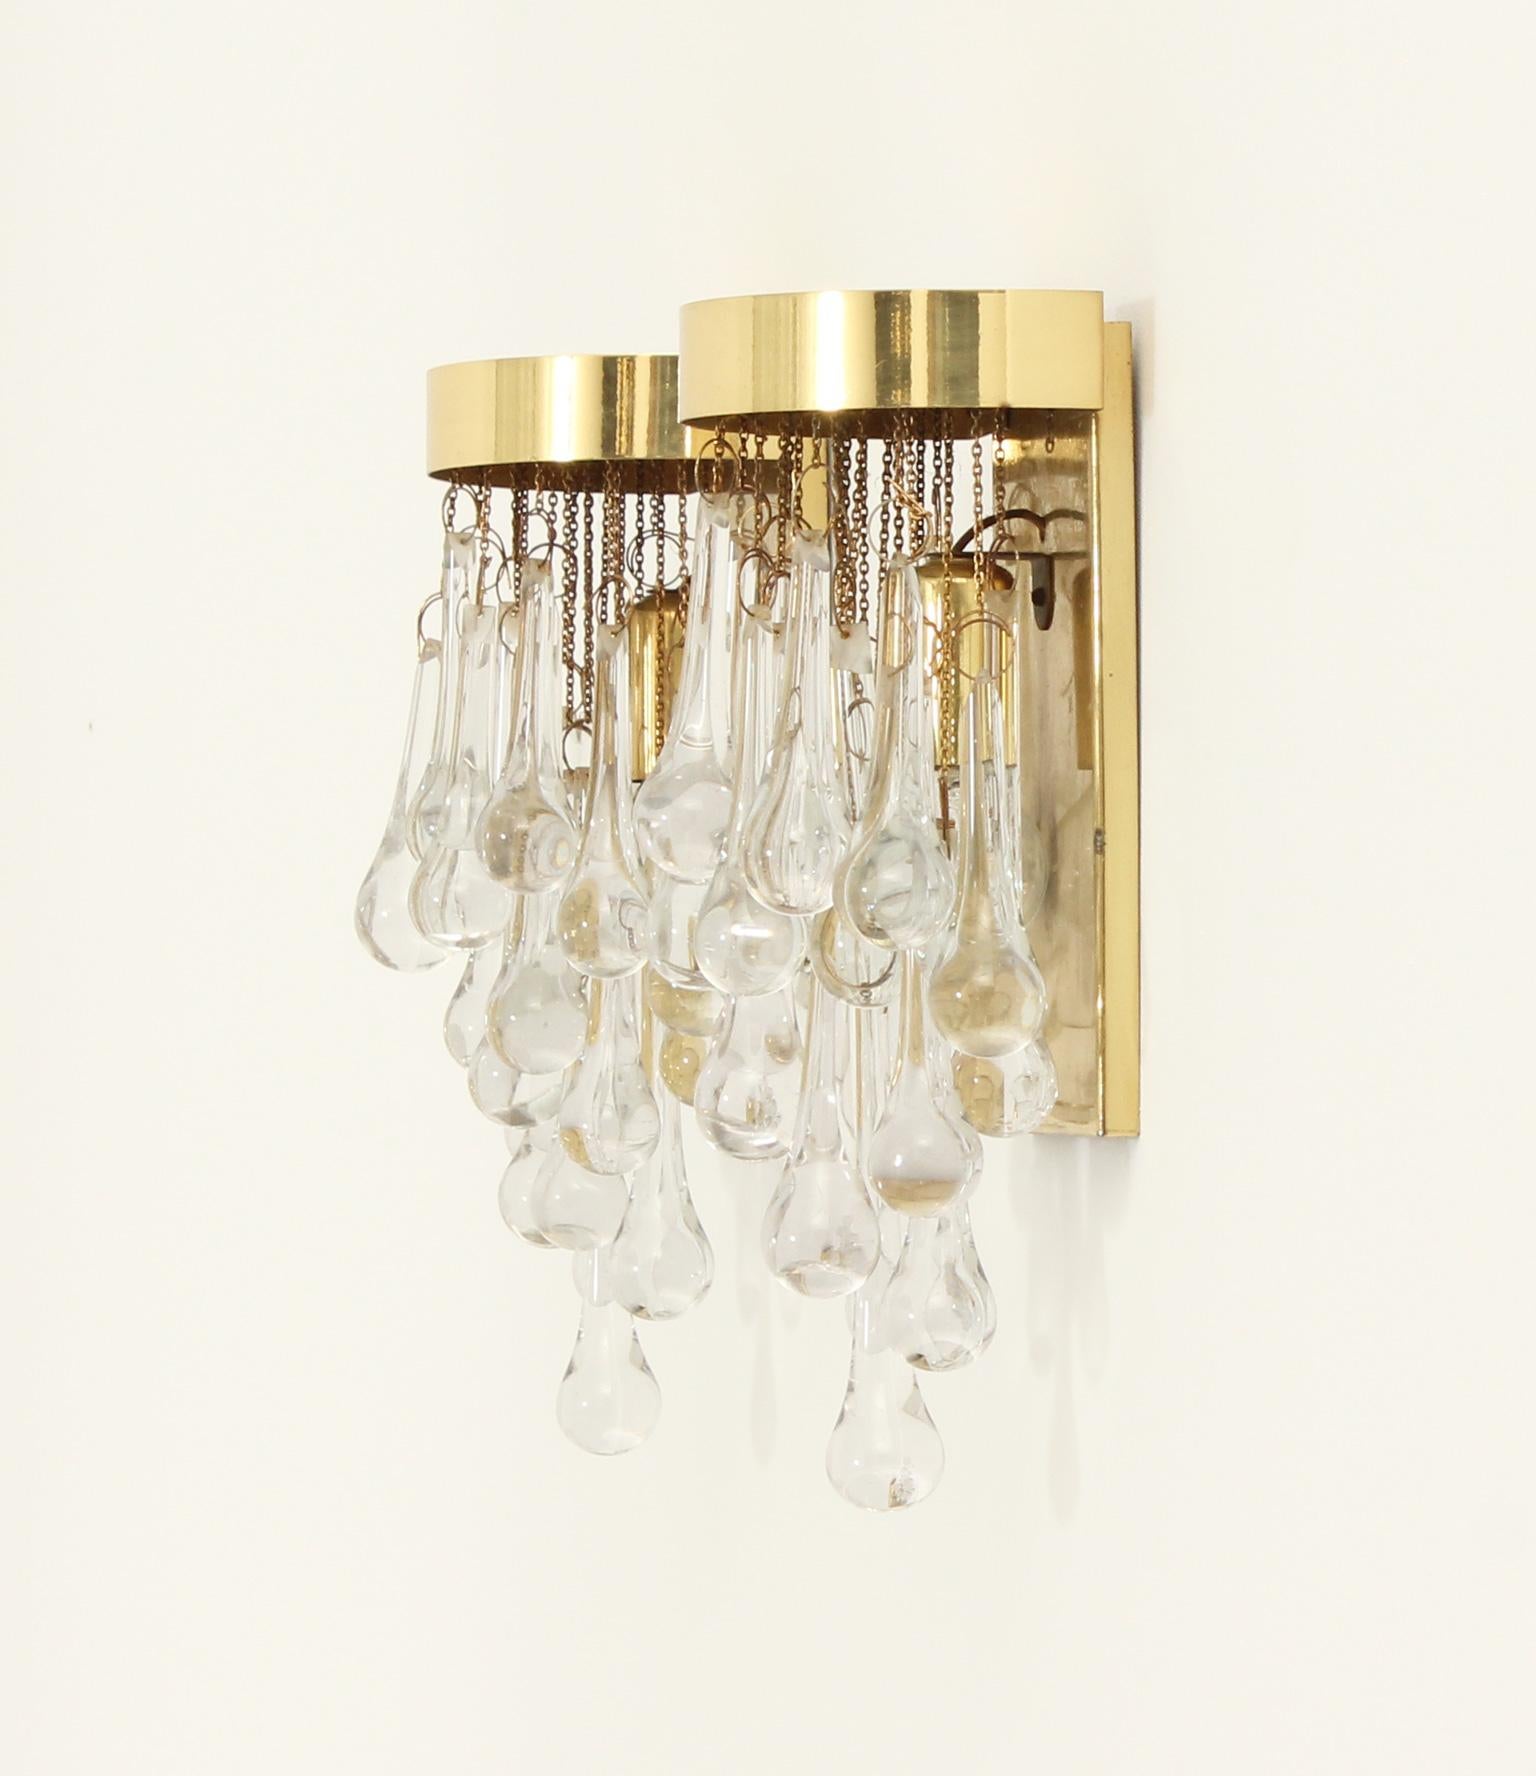 Late 20th Century Pair of Brass and Glass Teardrop Sconces by Lumica, Spain, 1970's For Sale